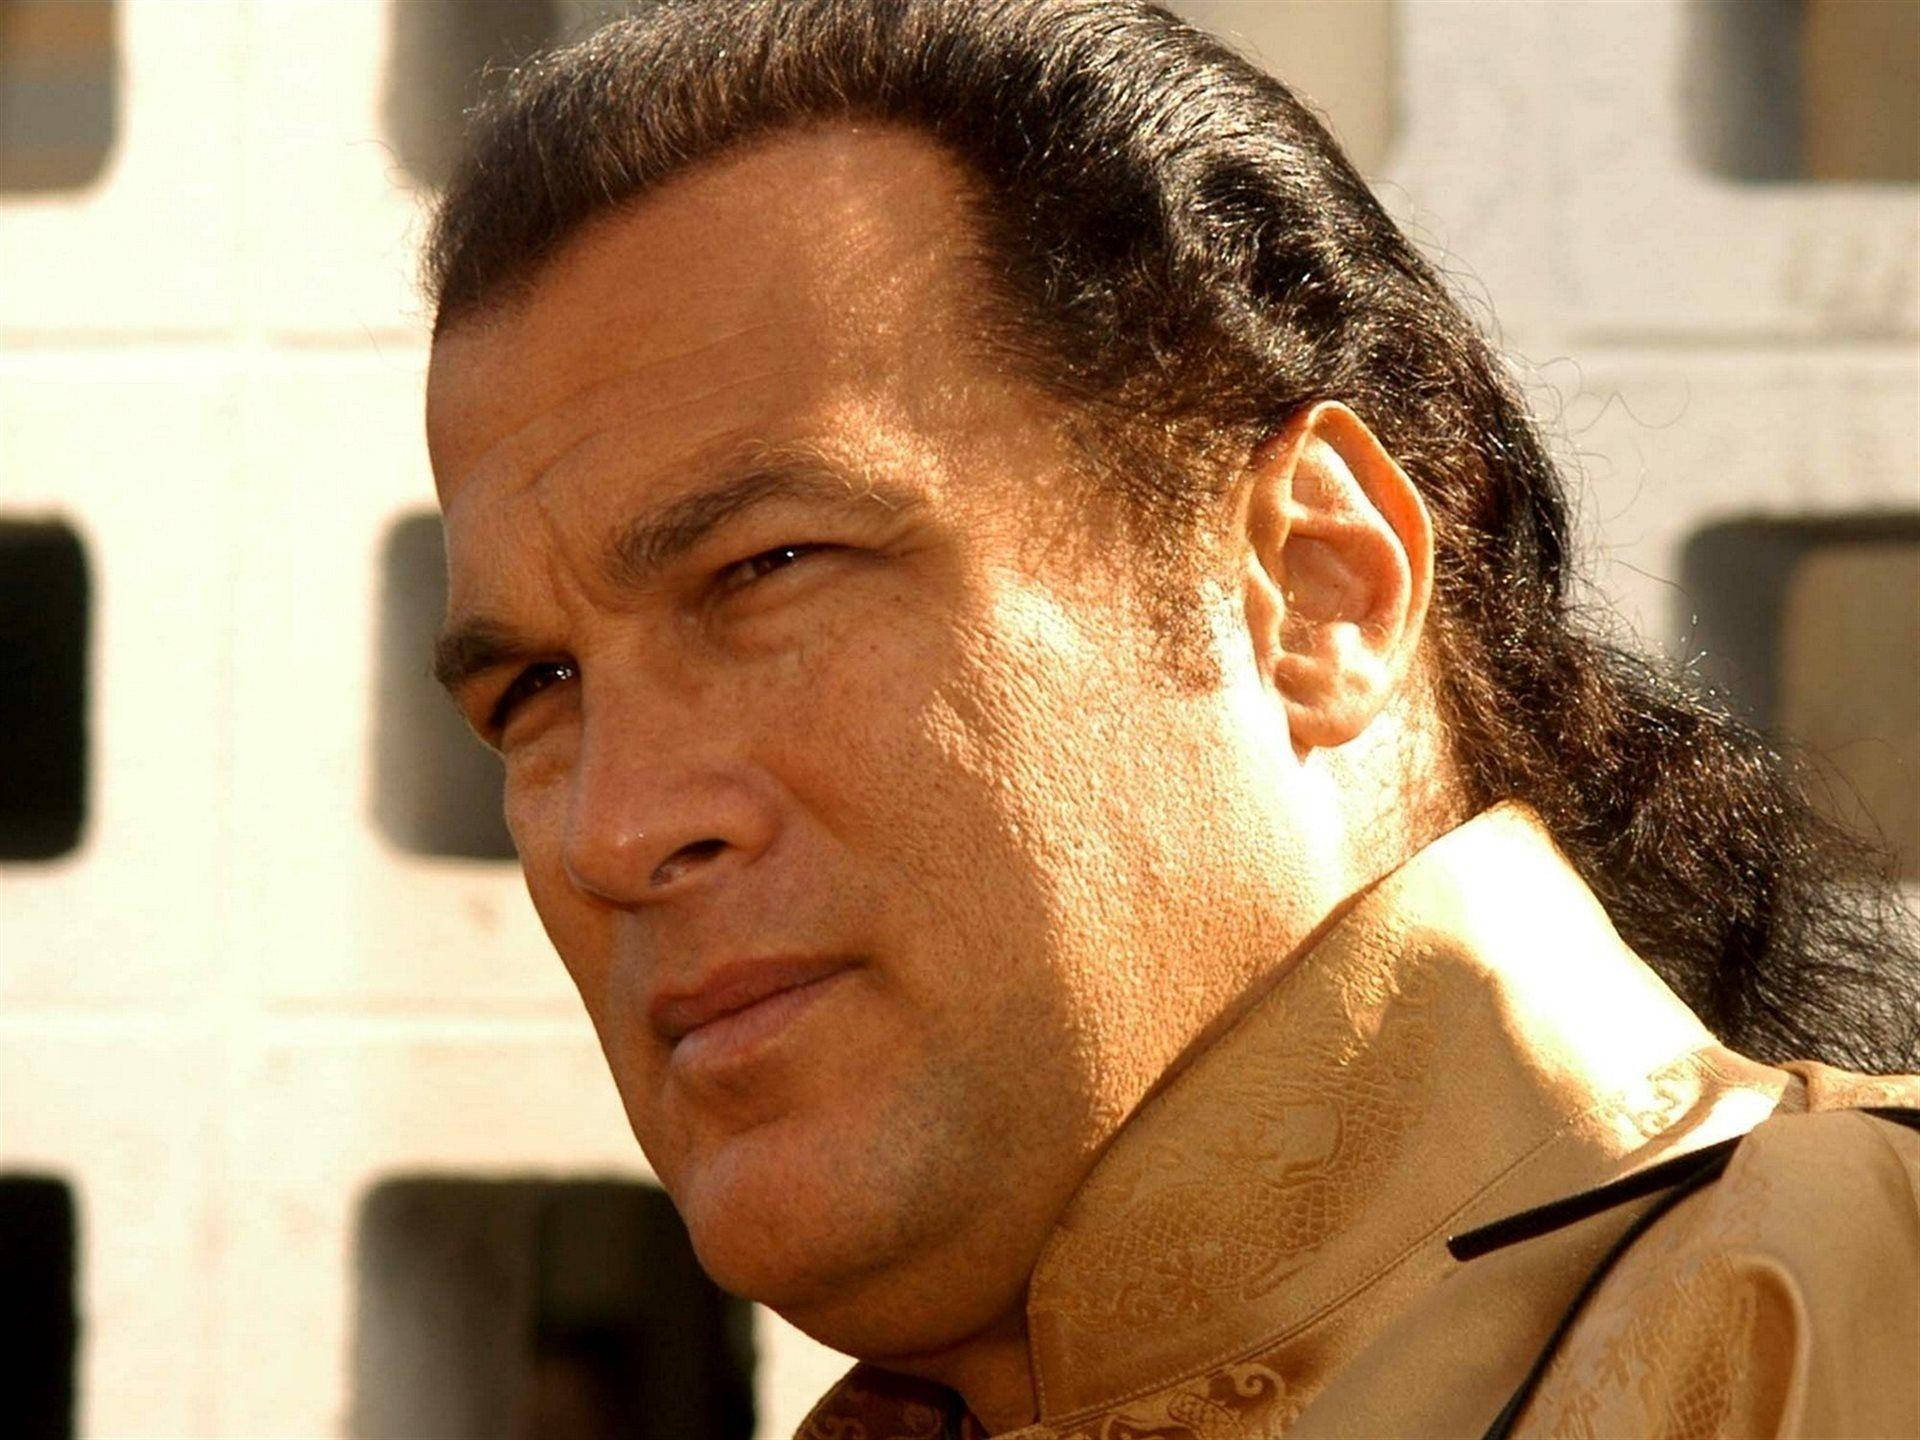 Hollywood Icon, Steven Seagal in Promotional Still Wallpaper